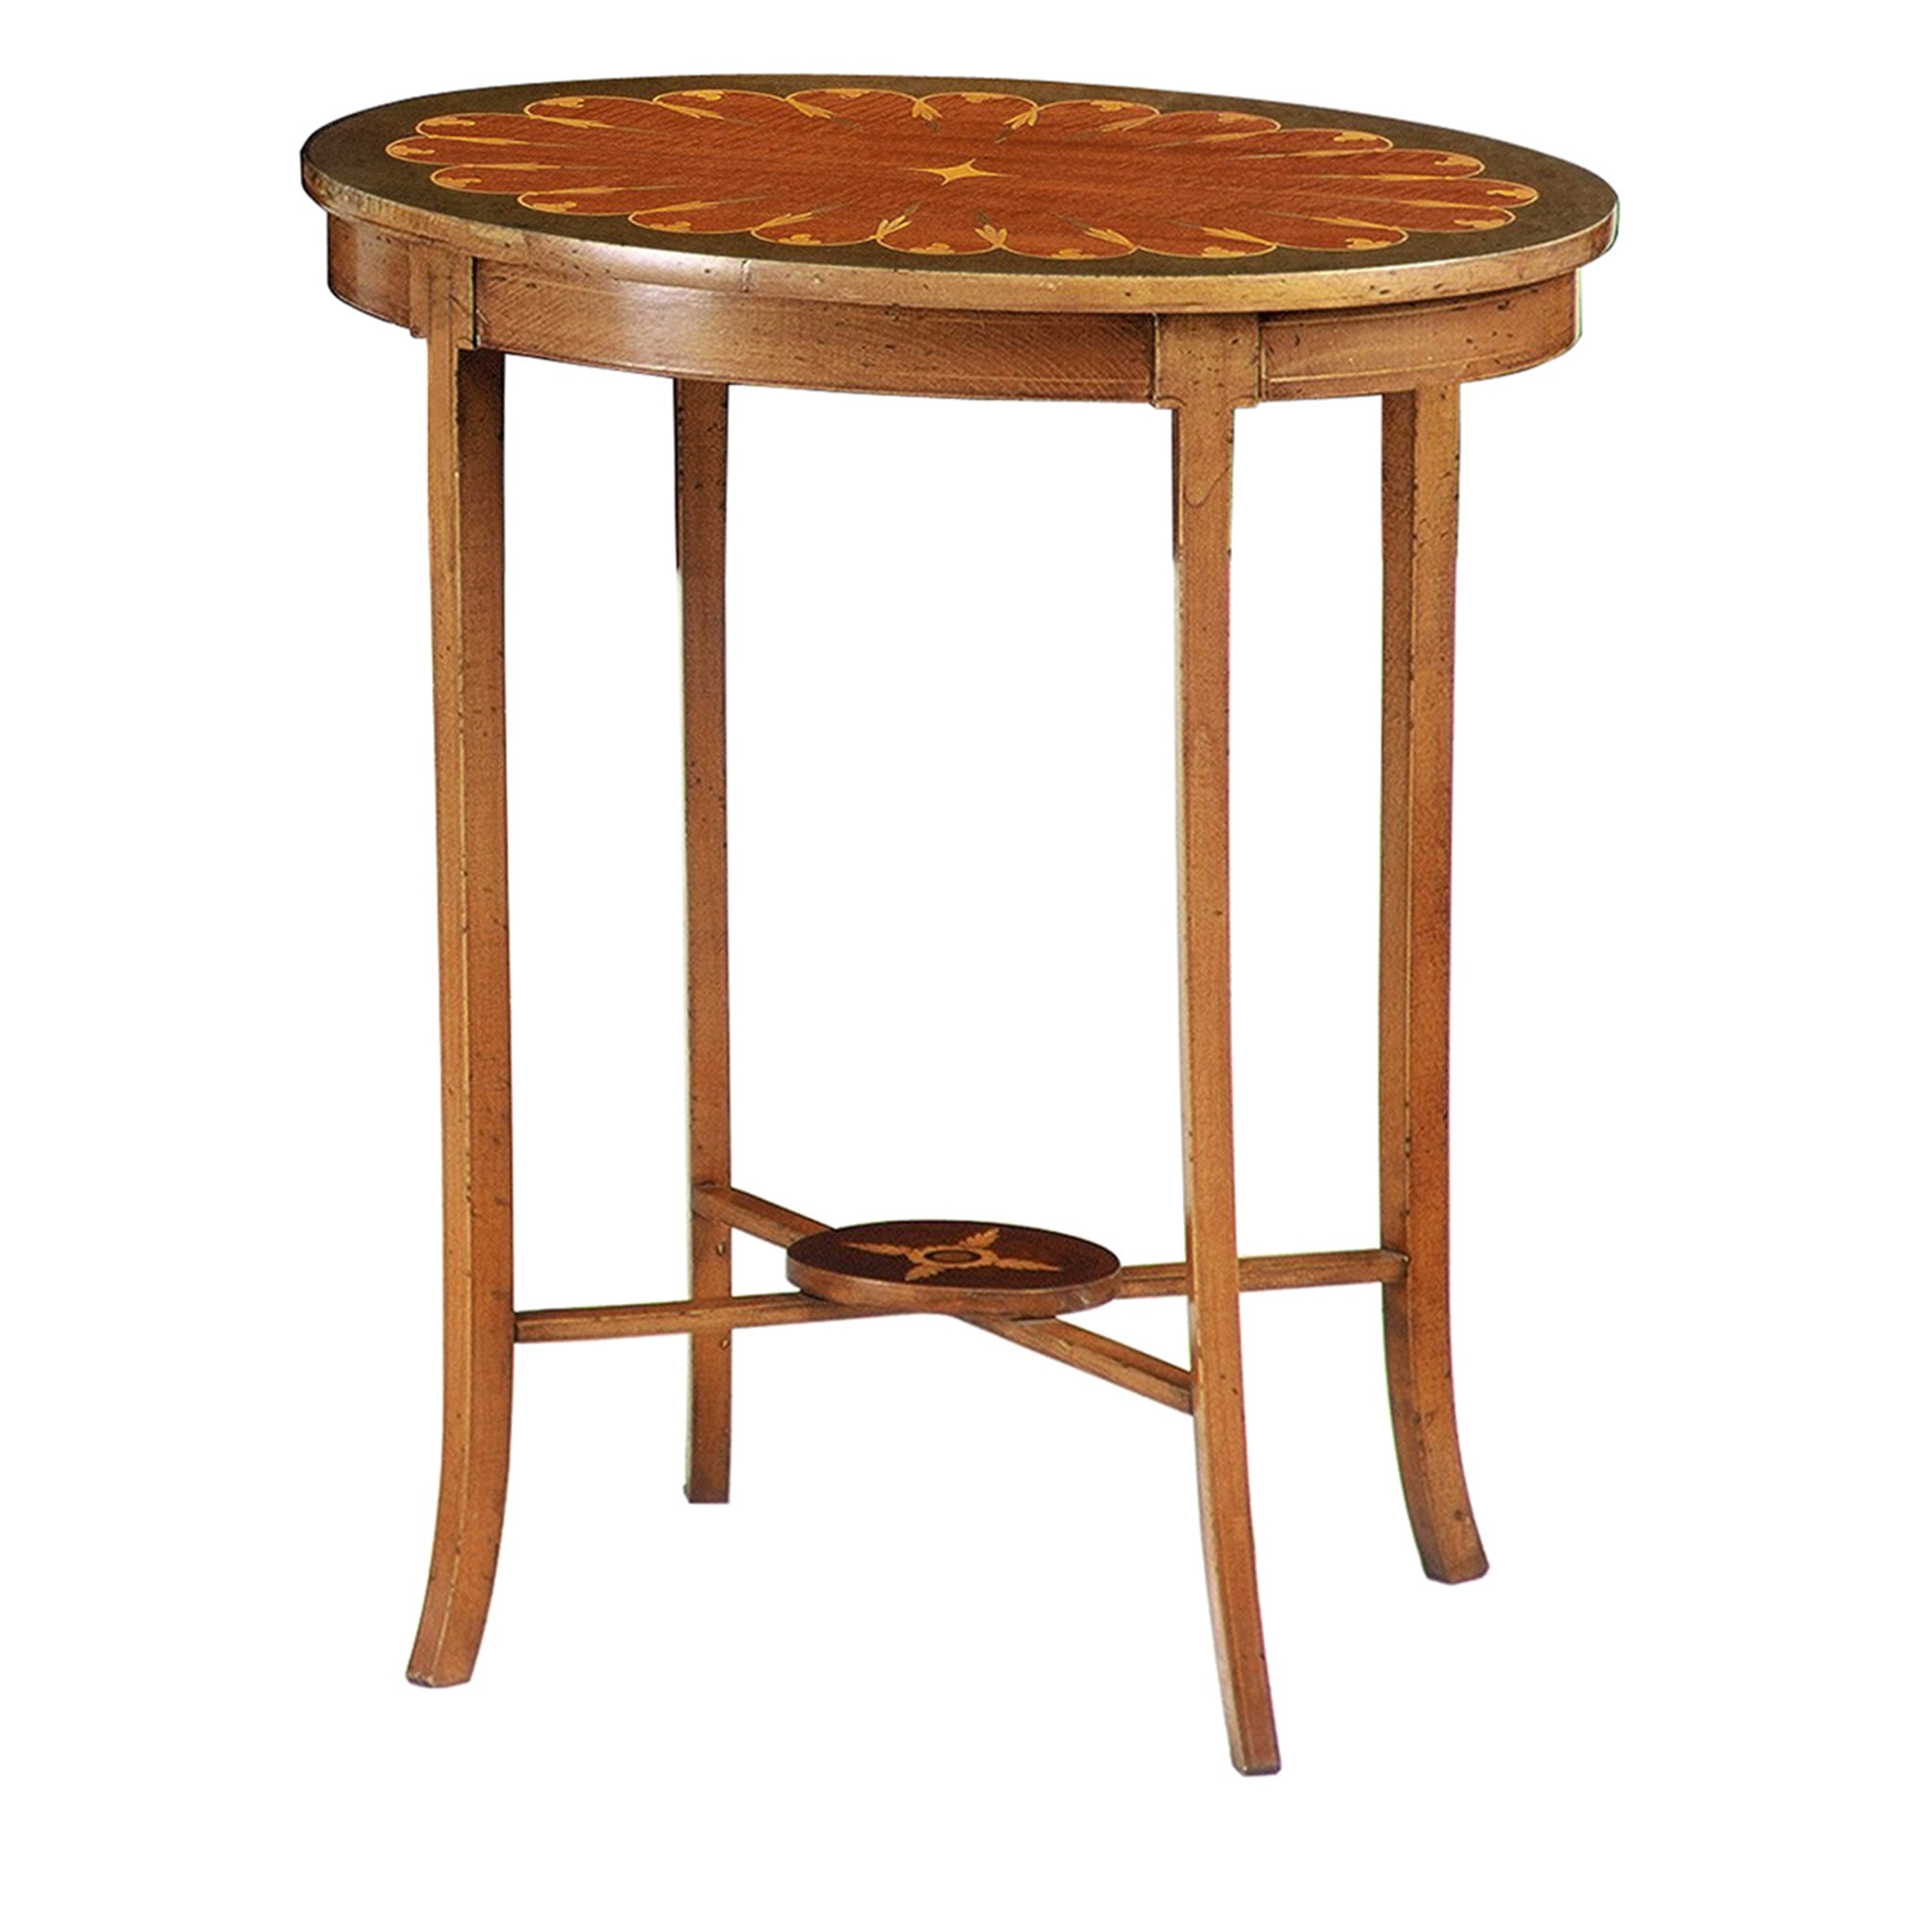 Late 29th-Century Inlaid Oval Side Table - Main view